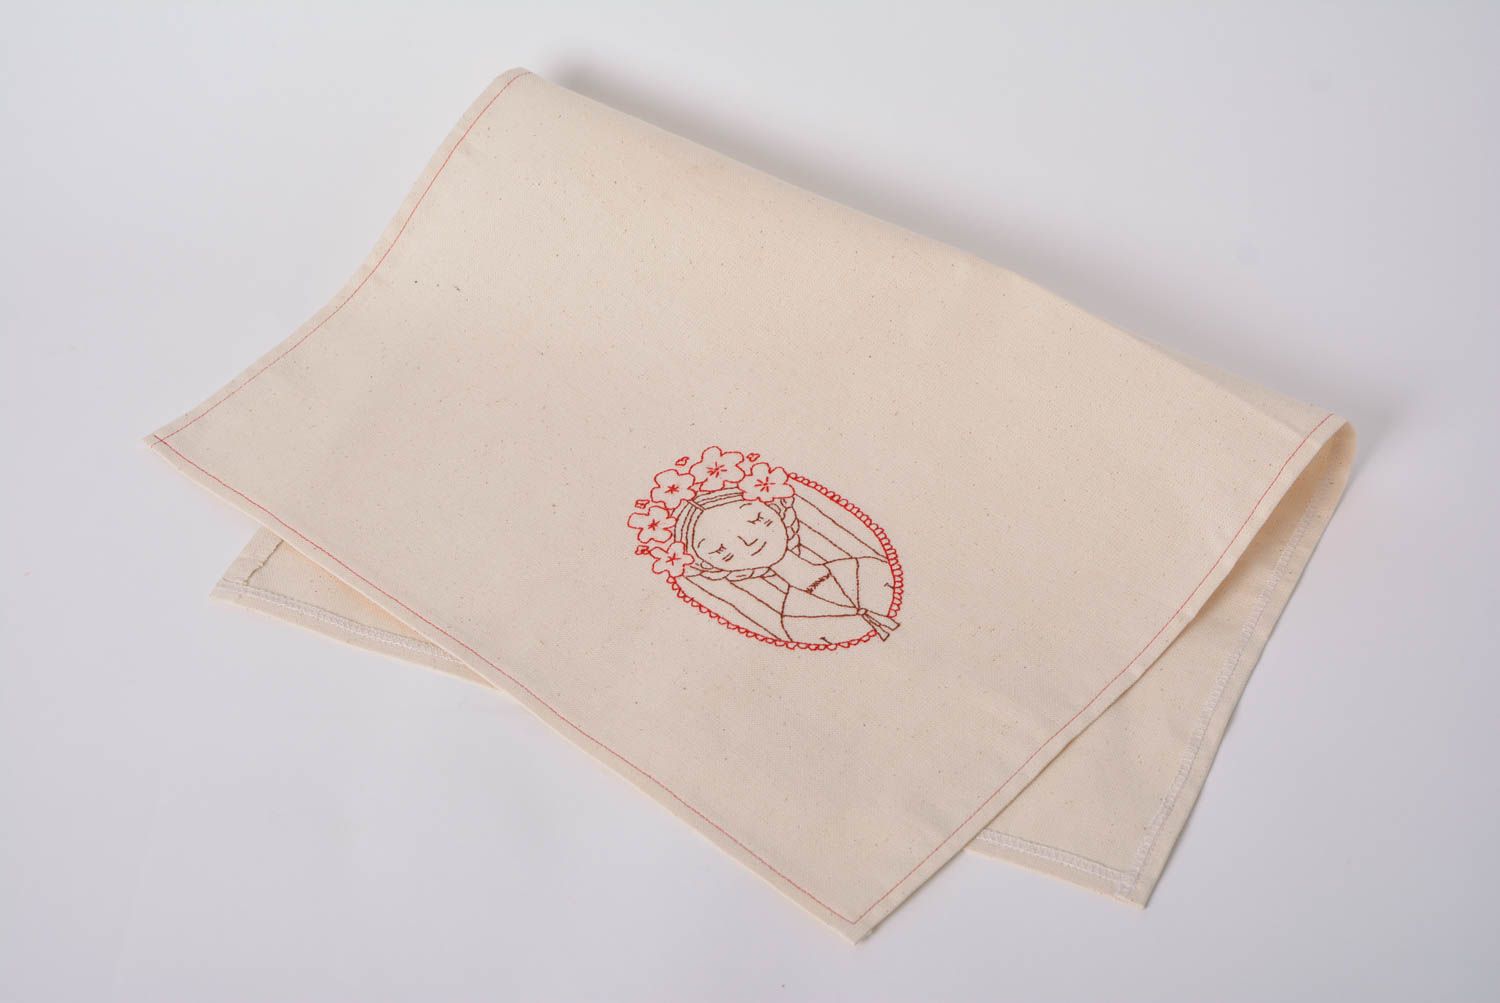 Handmade towel made of semi linen with hand-embroidery interior textile photo 1